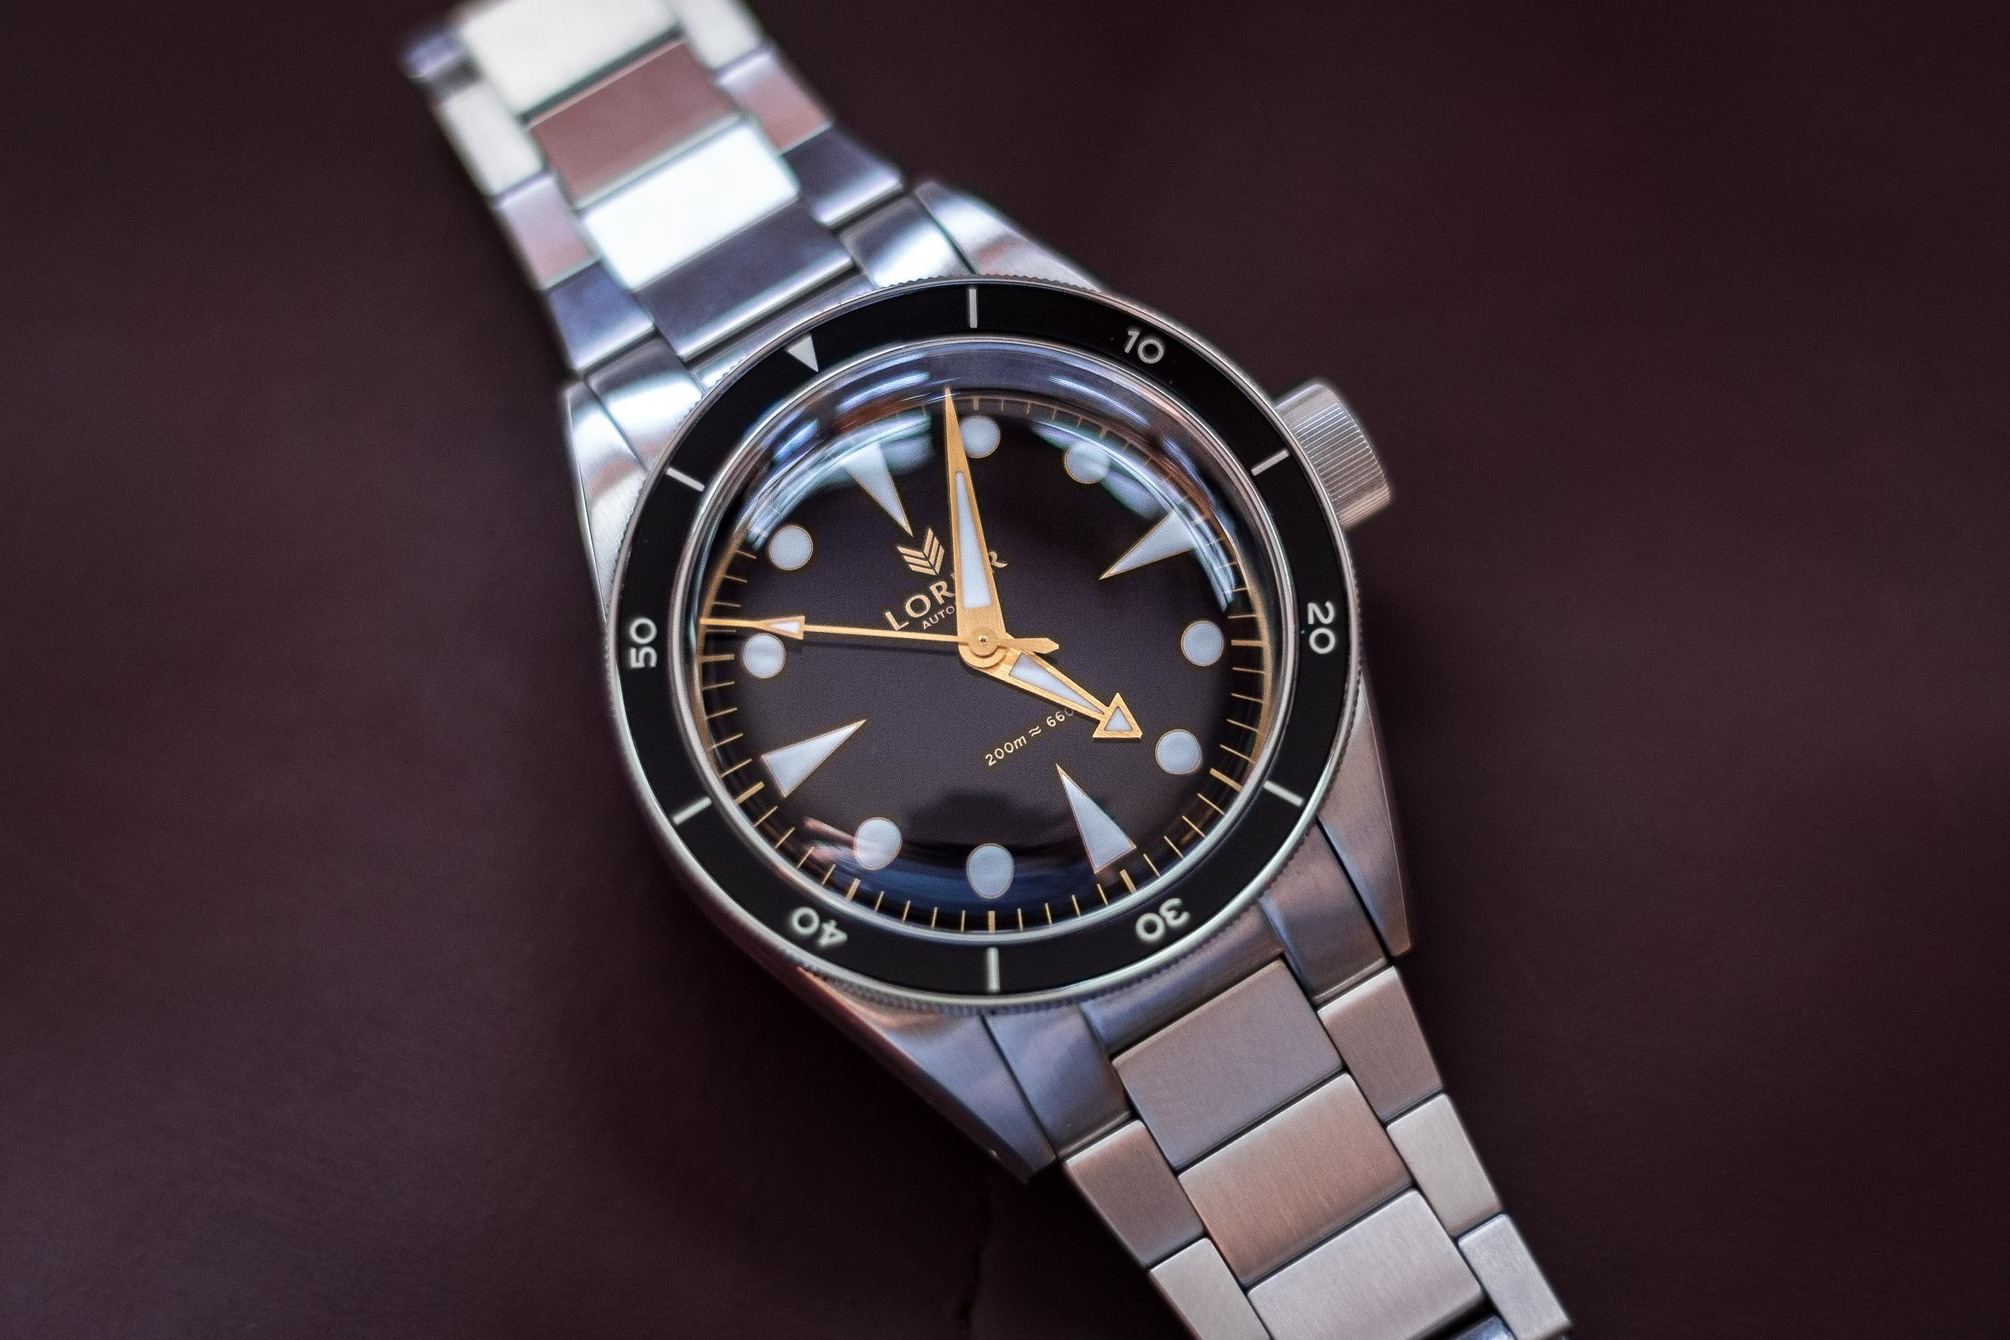 Lorier] Thoughts on the Lorier Neptune? Other micro-brand diver